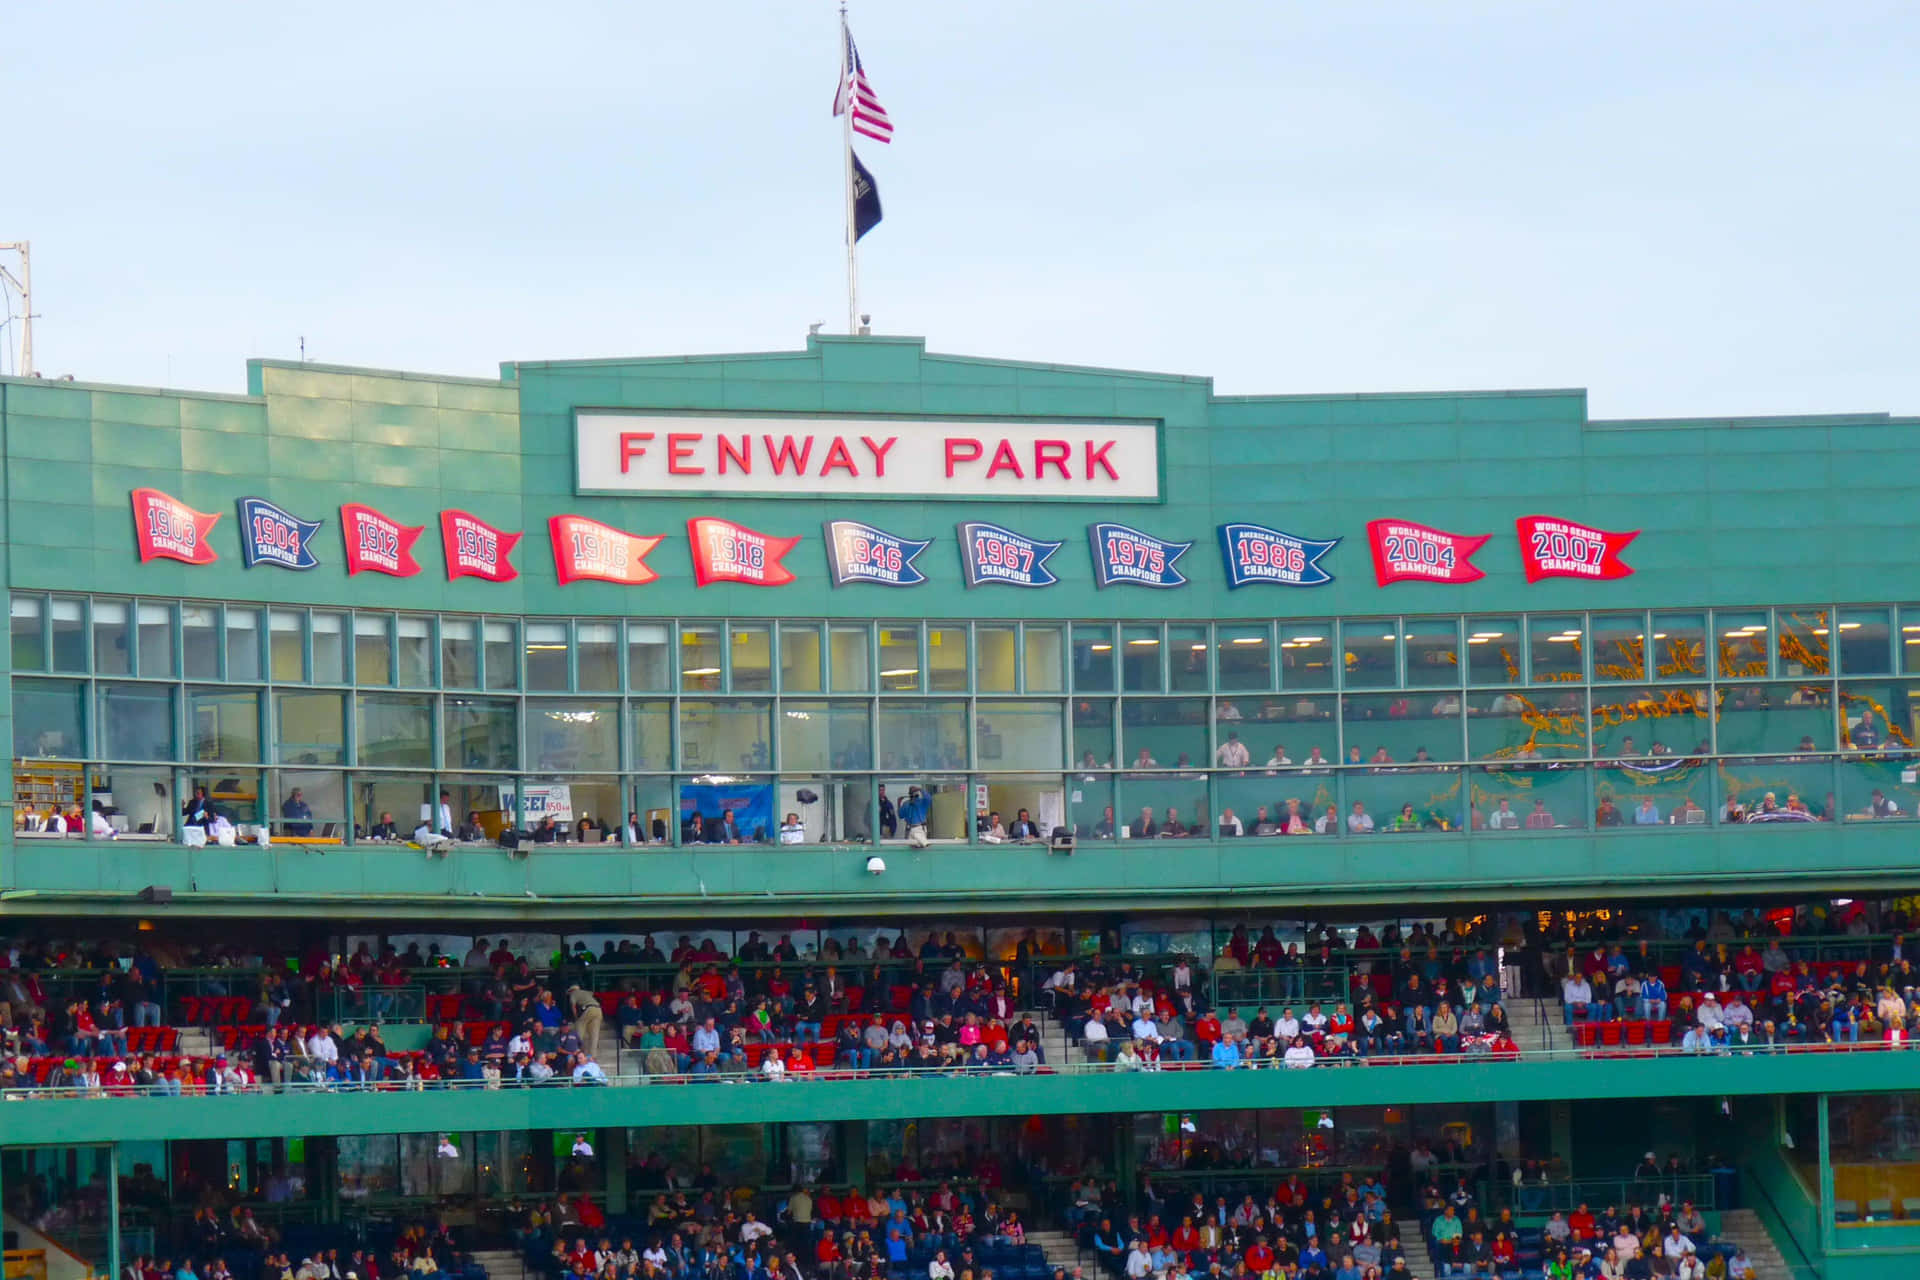 Take in the beauty of Fenway Park at twilight! Wallpaper